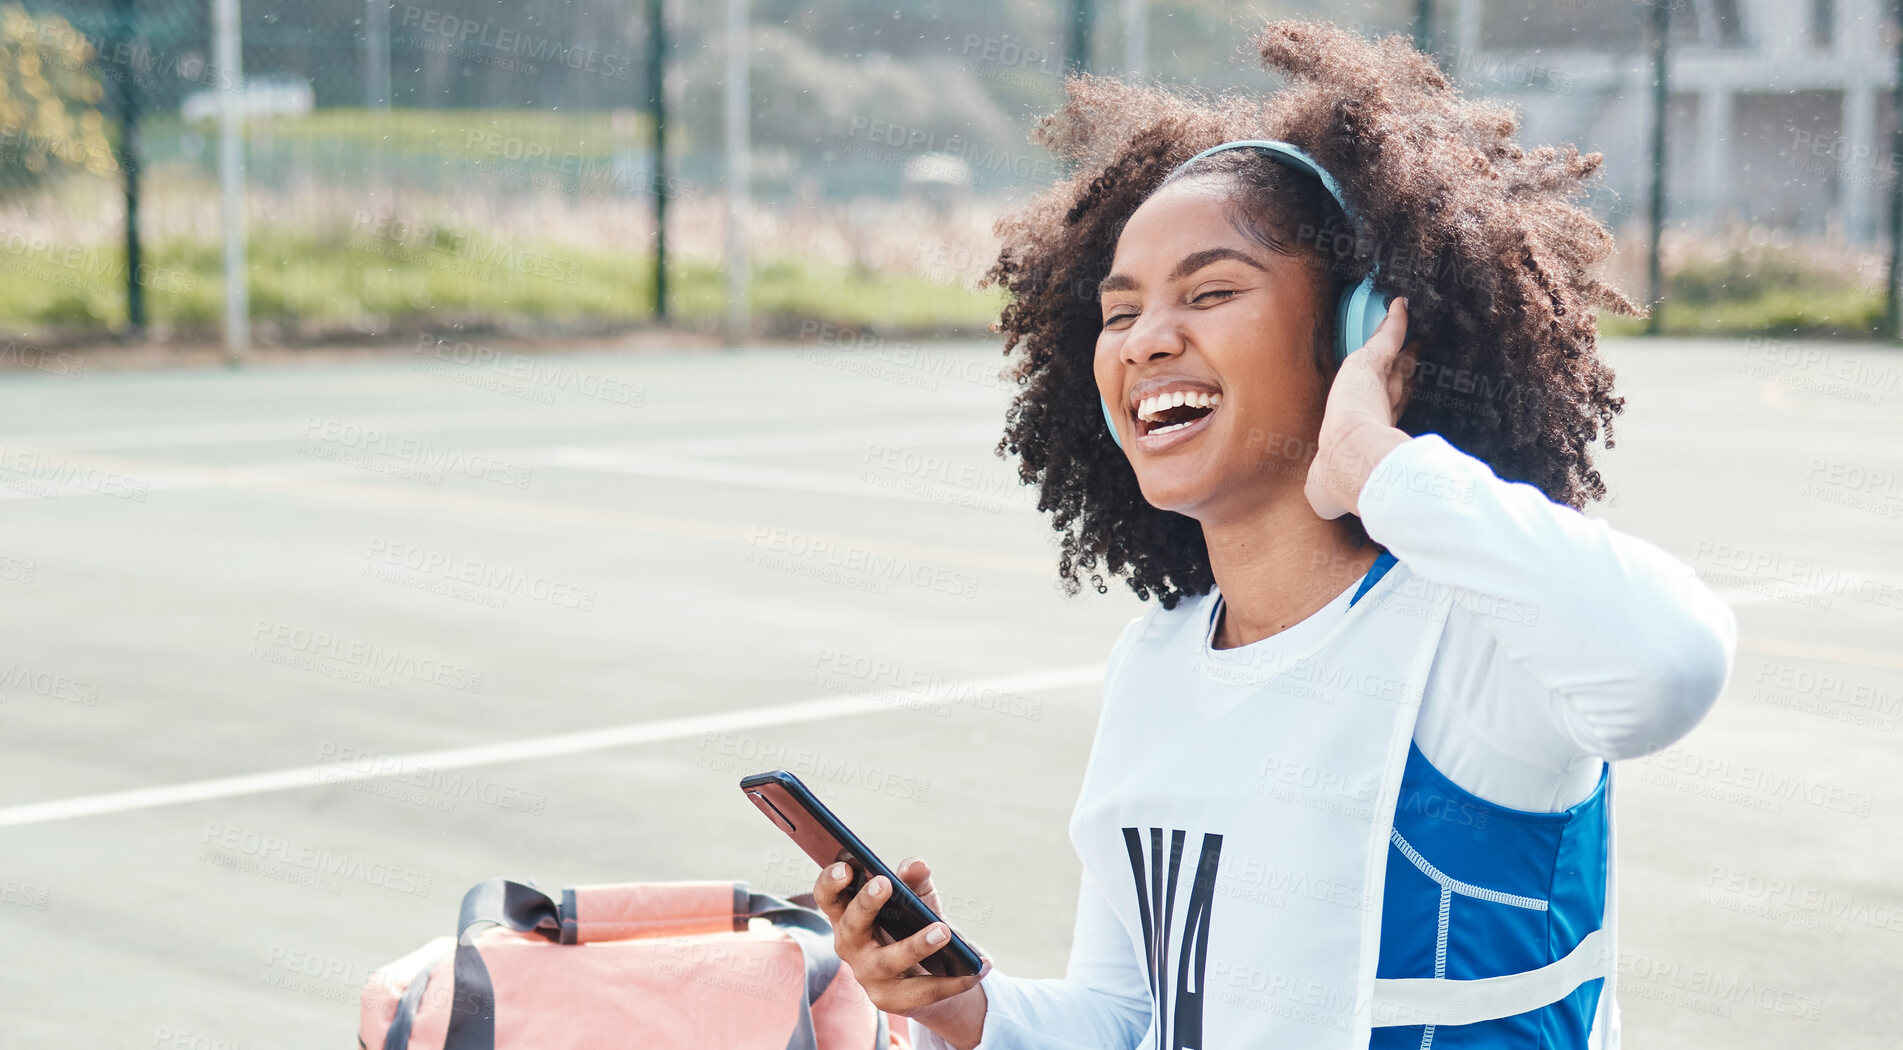 Buy stock photo Netball sports, smartphone music or happy woman listen to mp3 radio, audio podcast or media song after fitness training. Relax wellness, digital headphones or African athlete streaming sound on court